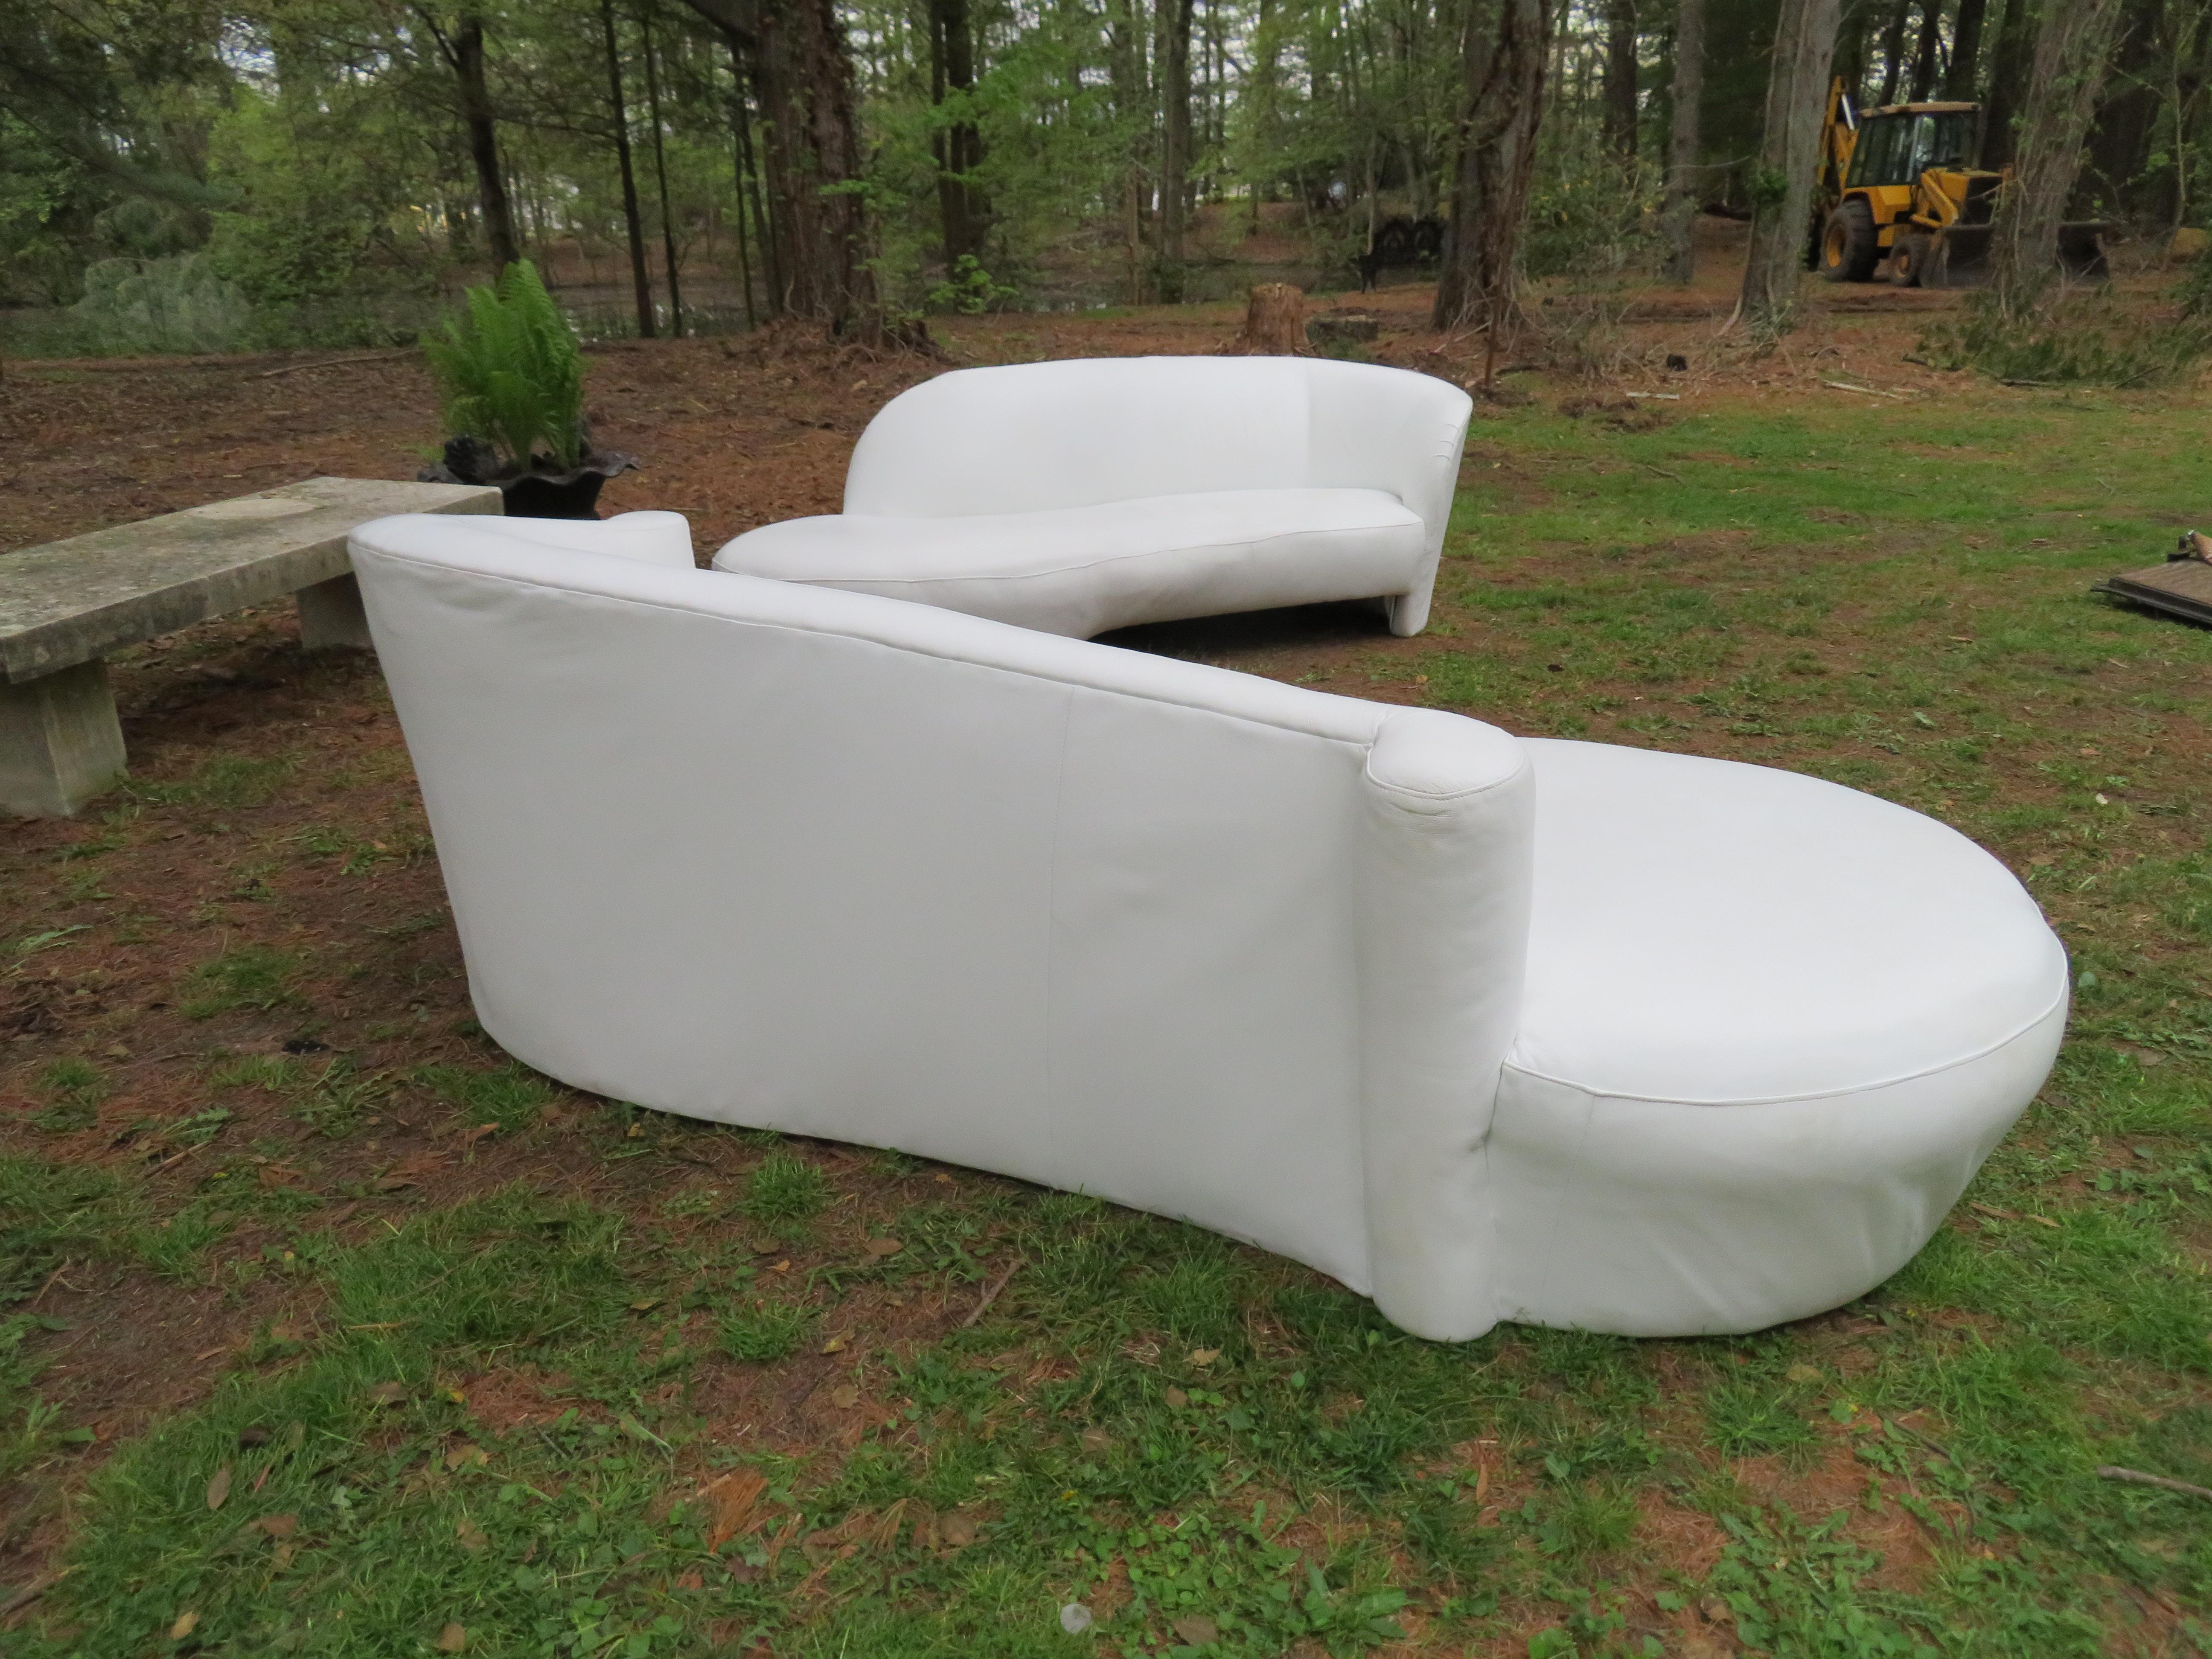 Fabulous Vladimir Kagan scrolled arm white leather cloud sofa, circa 1980's. This sofa has been recently re-upholstered in a durable thick white leather and looks great. Check out the coordinating Kagan white leather sofa that we also have-they look